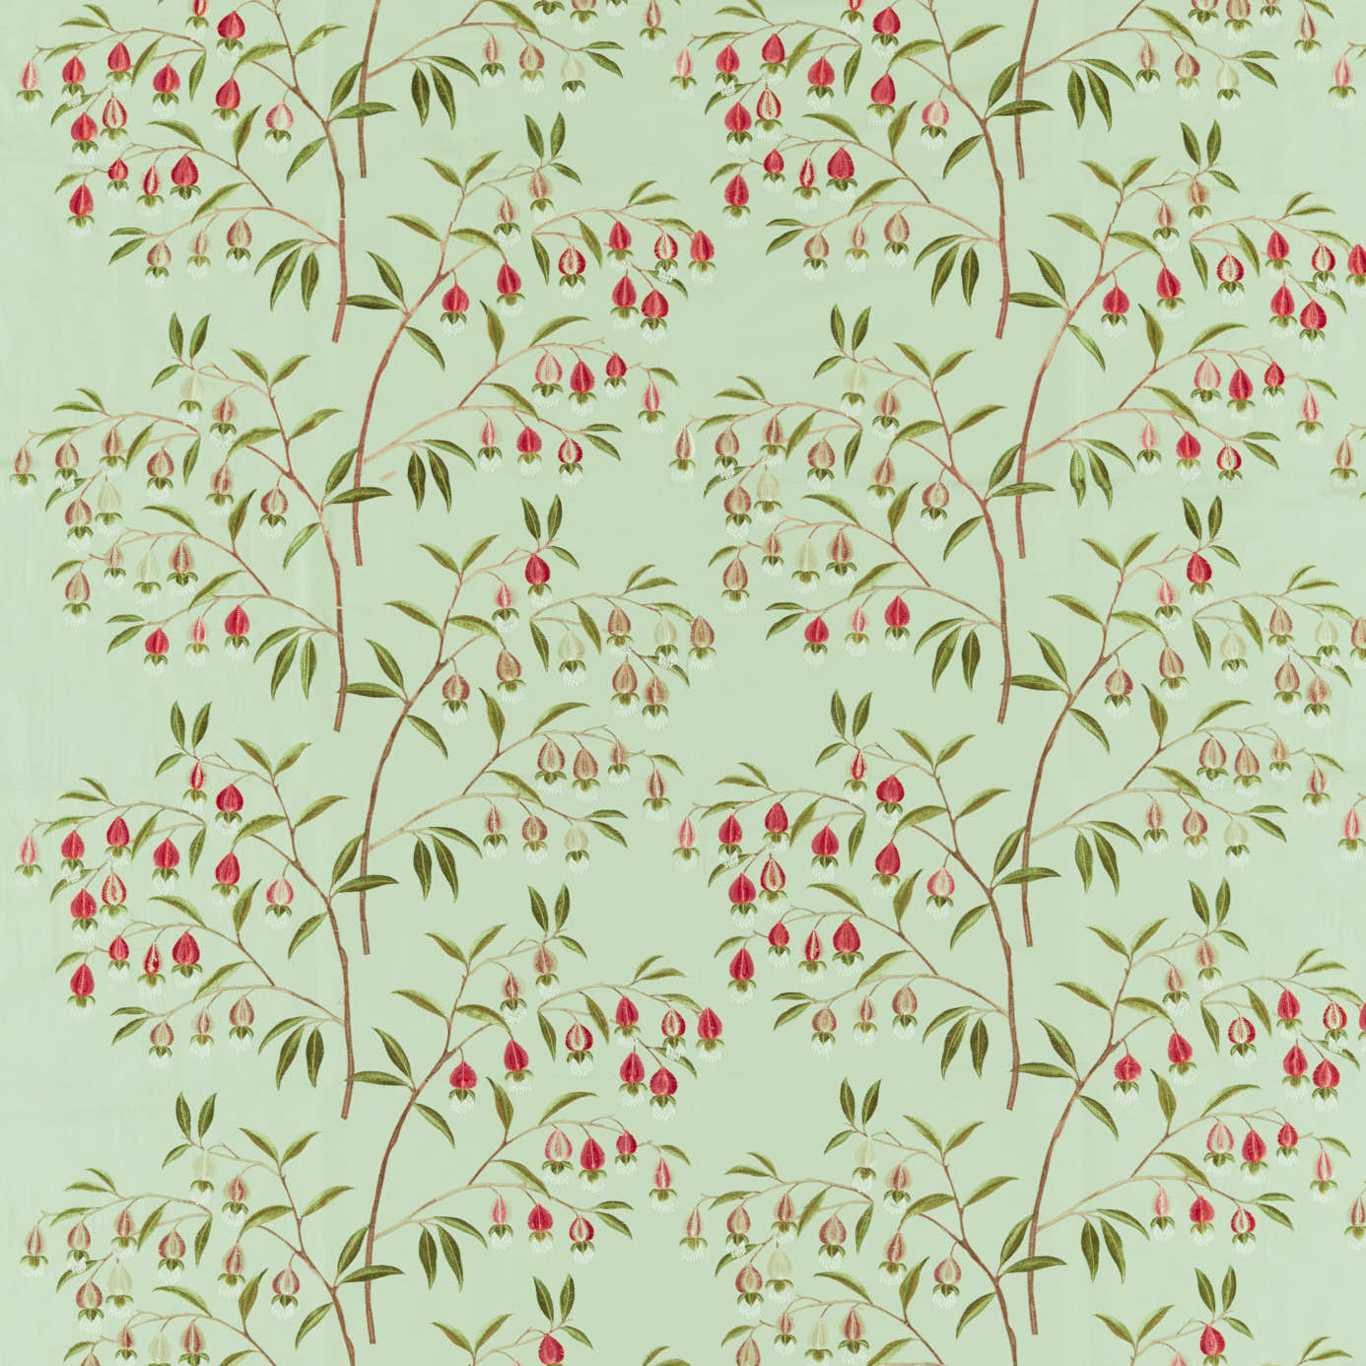 Chinese Lantern Mint and Apricot Fabric By Sanderson